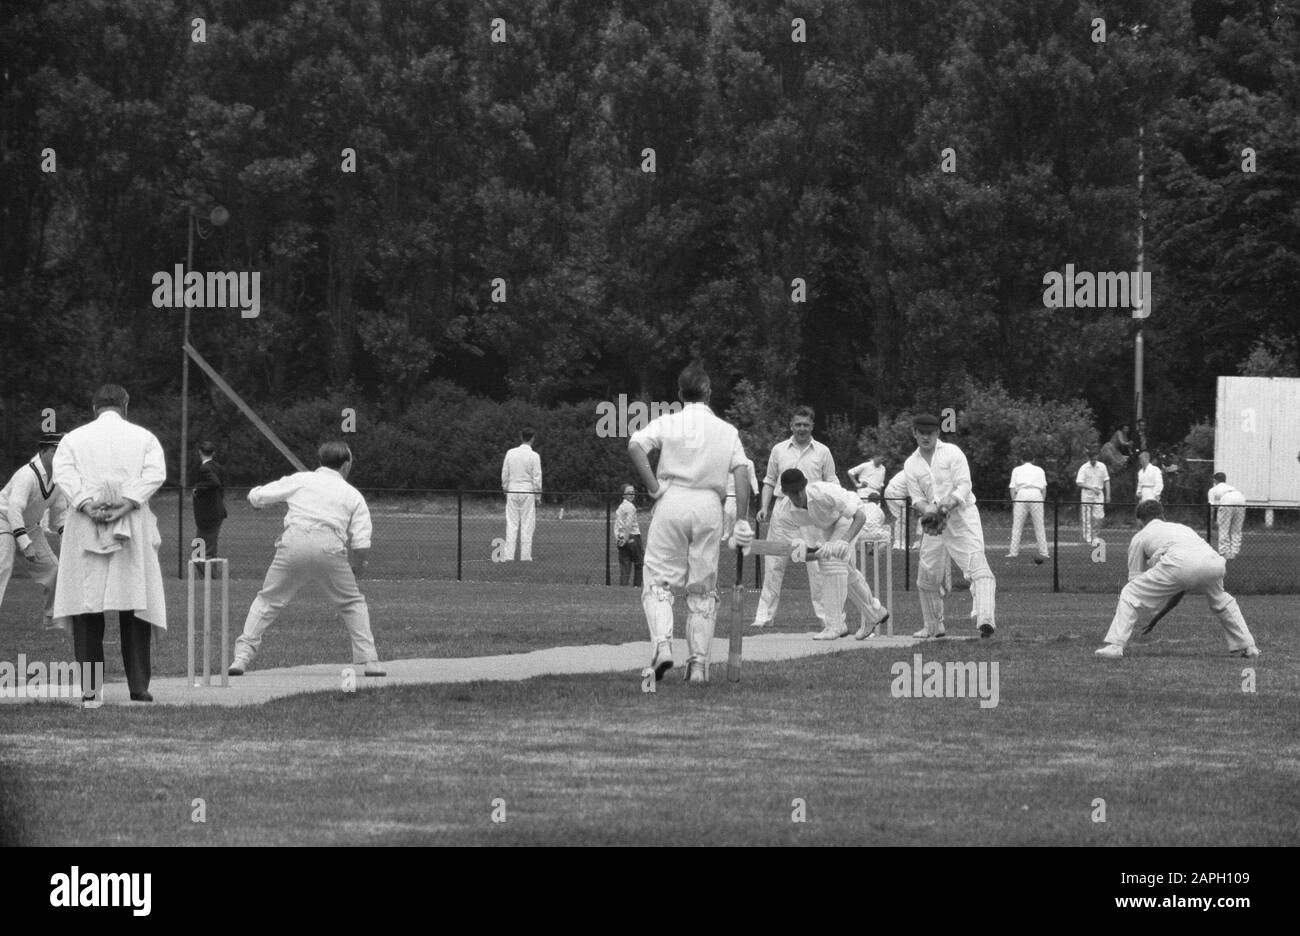 Cricket HCC v Rood en Wit in The Hague Date: June 21, 1959 Location: The Hague, Zuid-Holland Keywords: cricket, sport Stock Photo